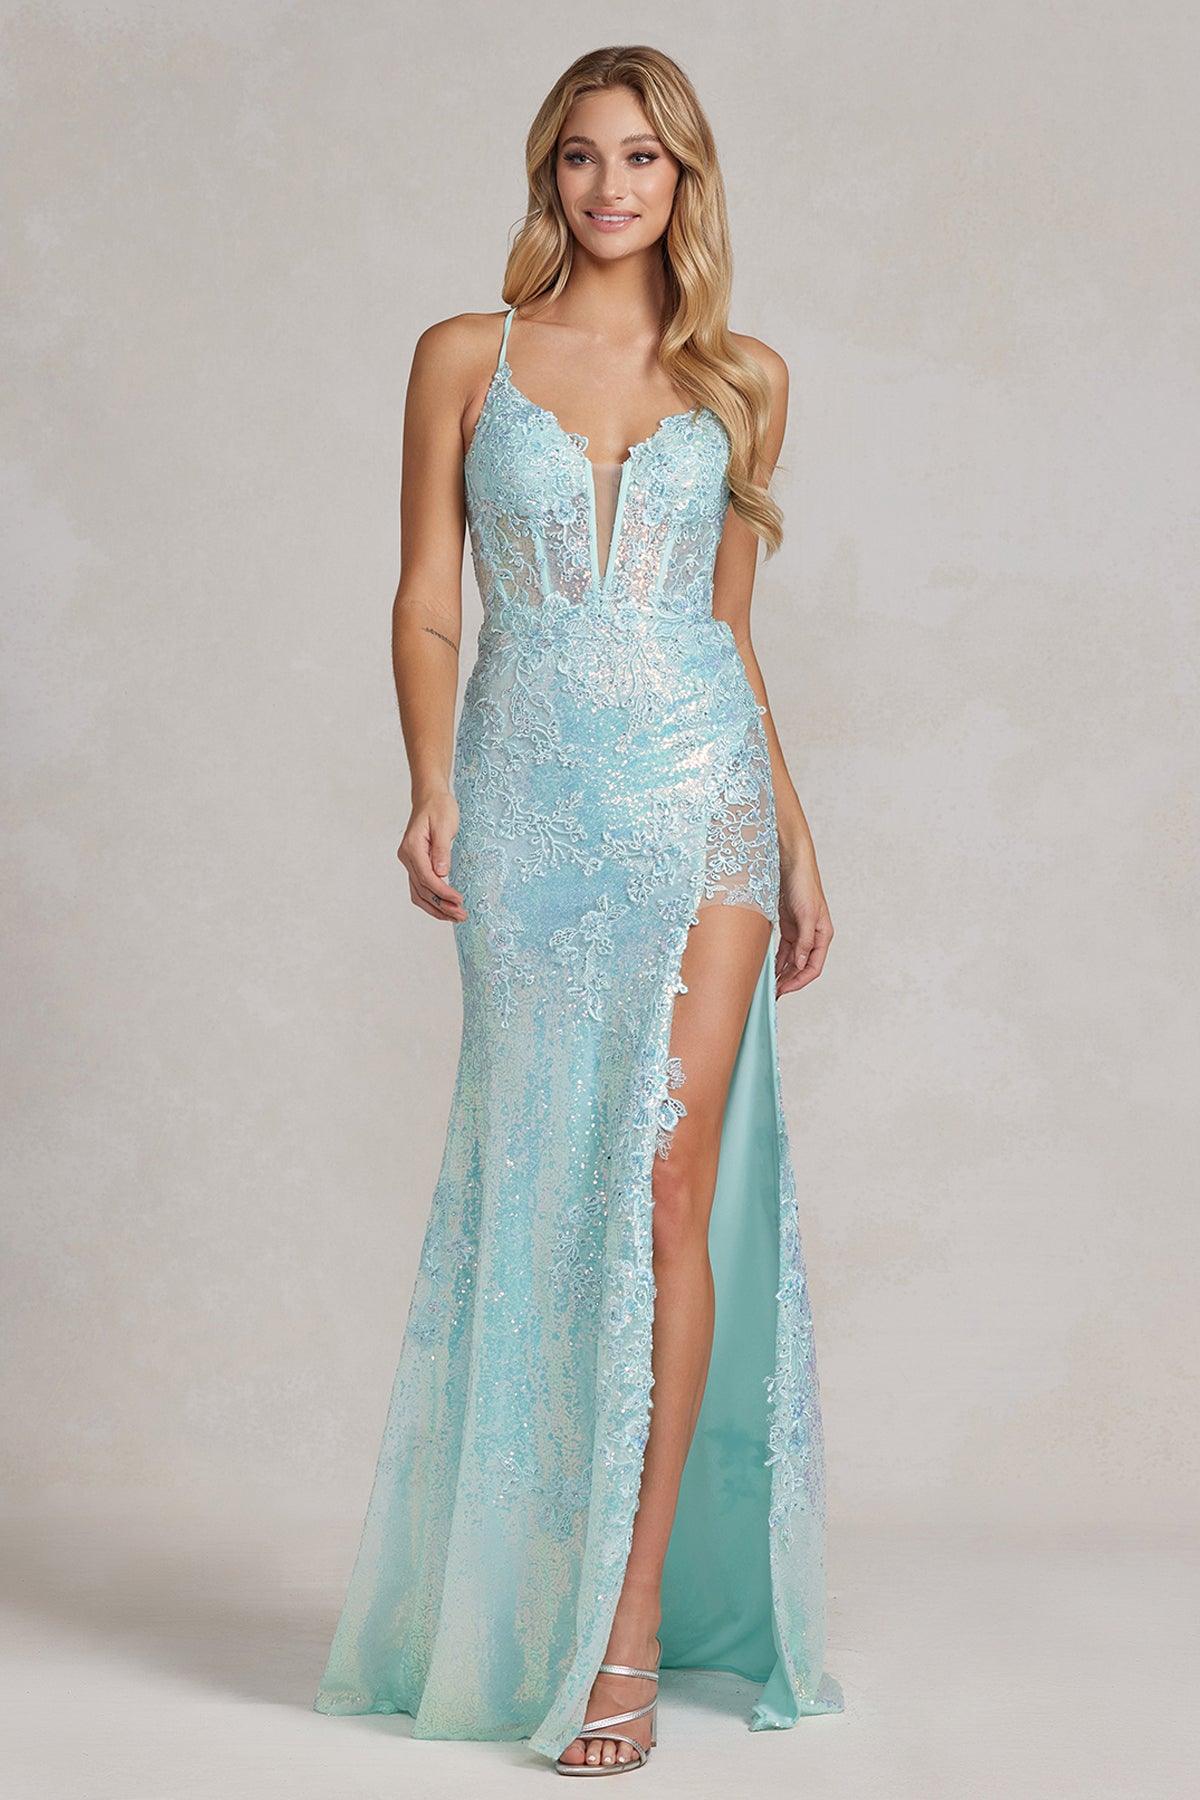 Nox Anabel D1157 Long Spaghetti Strap Sequins Gown